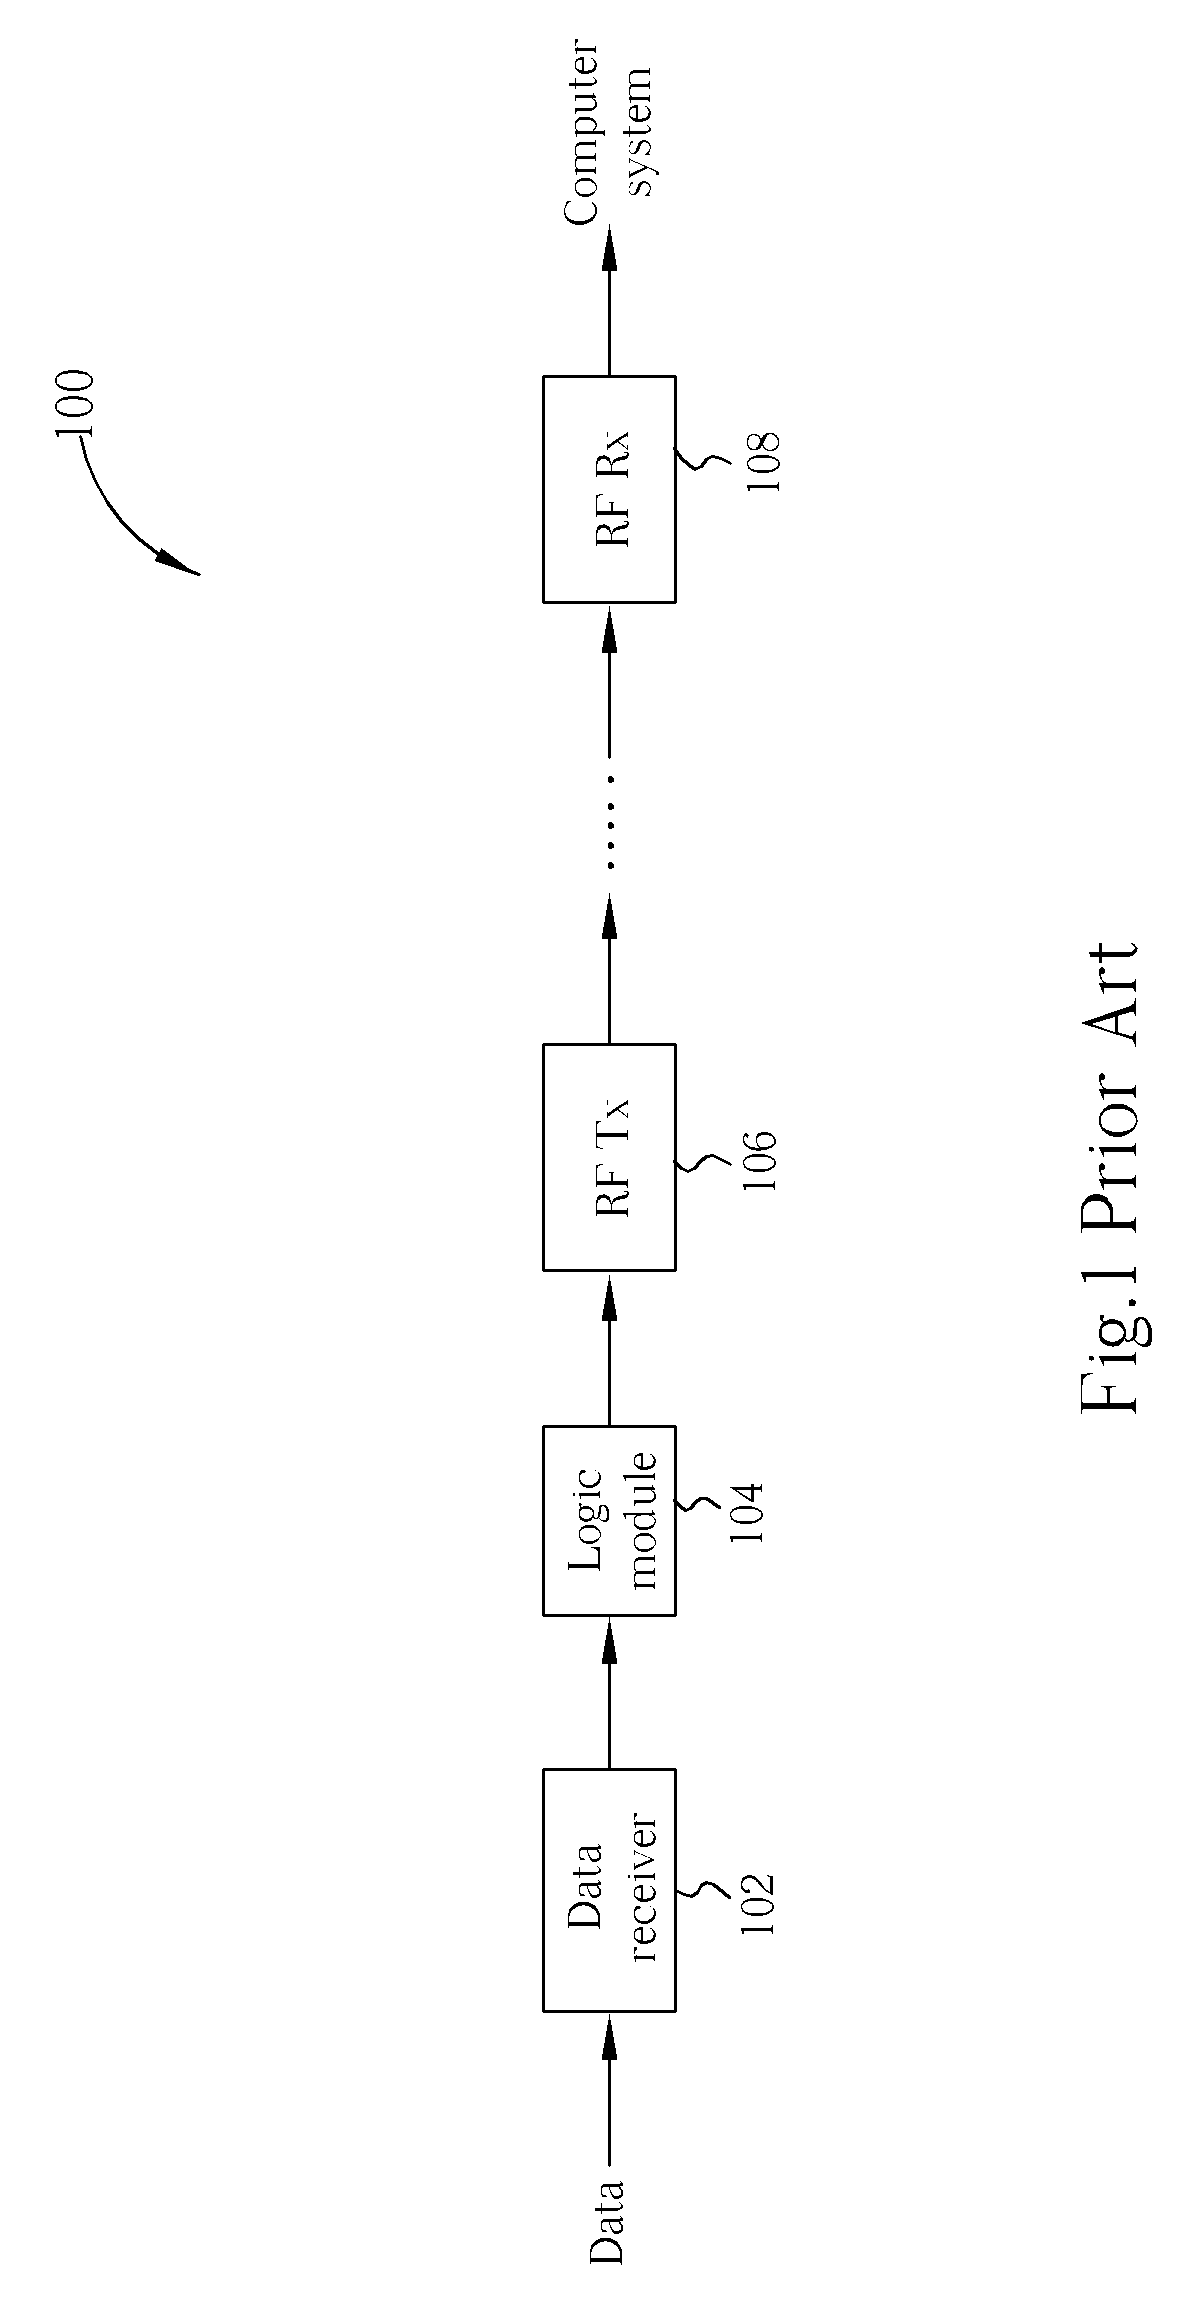 Method And Related Apparatus For Decreasing Delay Time And Power Consumption Of A Wireless Mouse